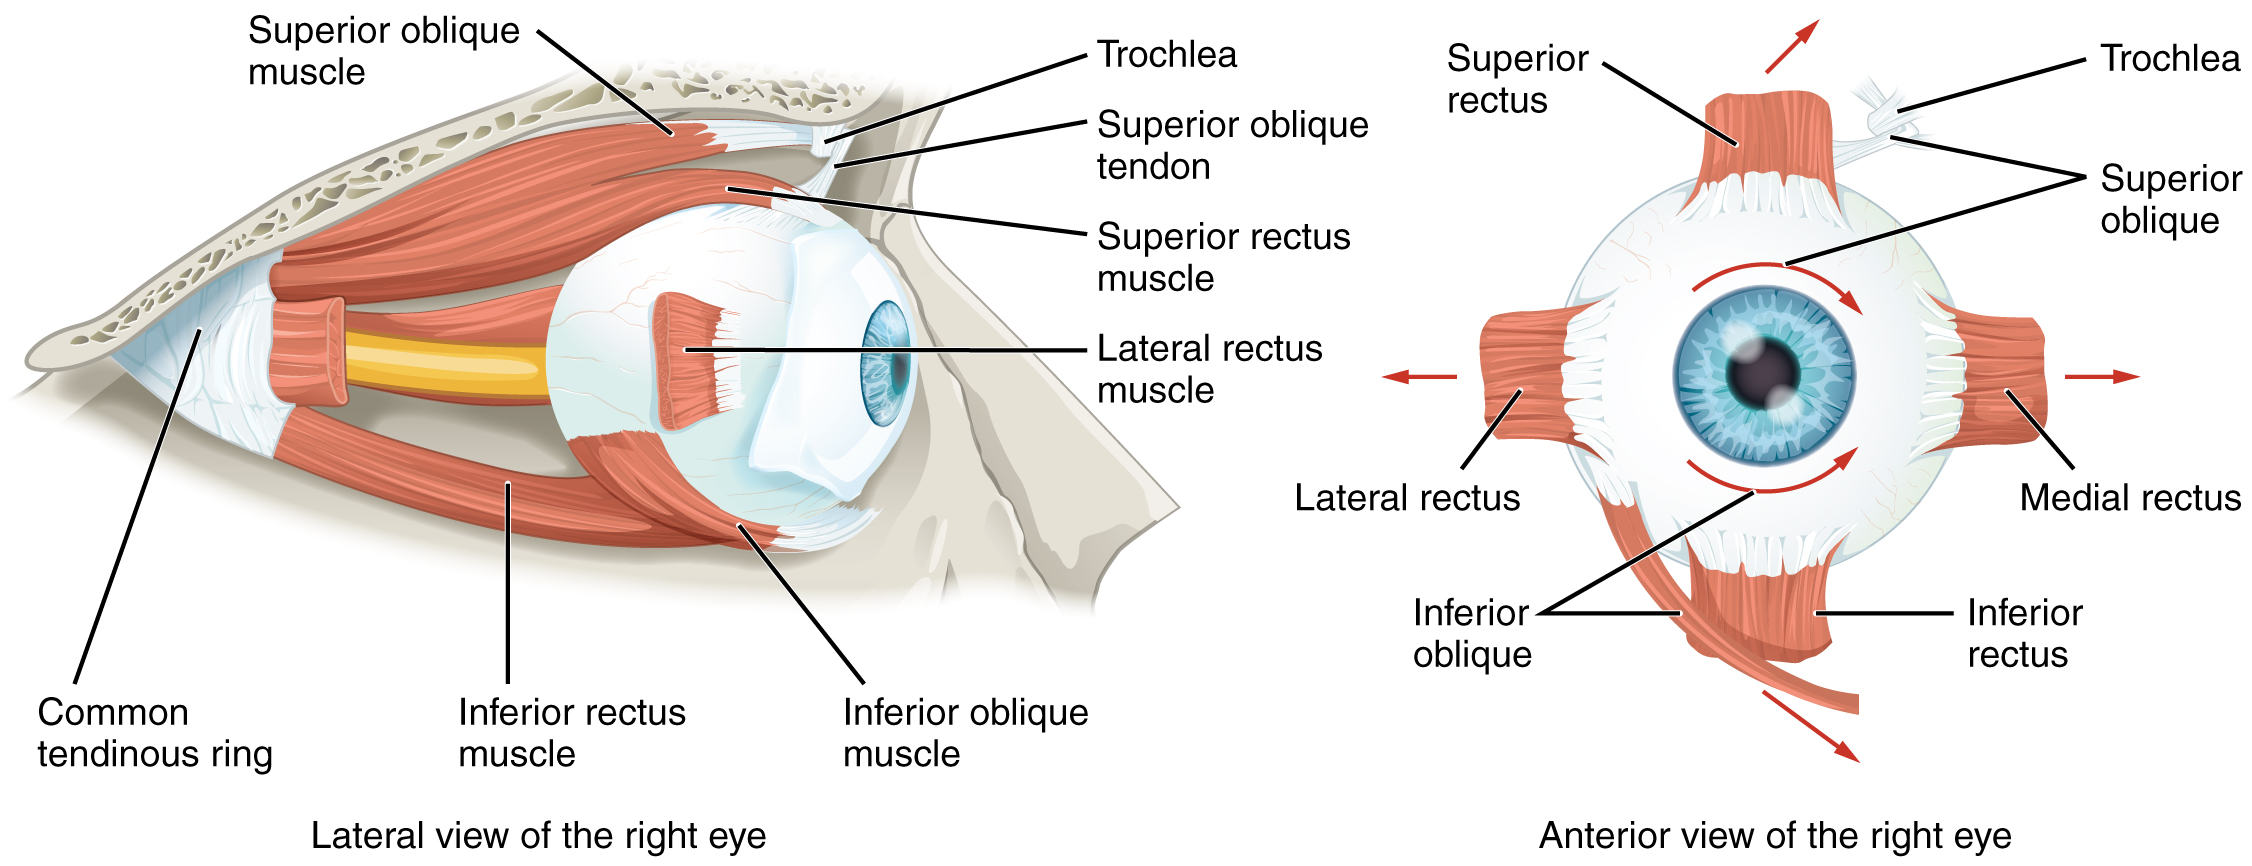 This image shows the muscles surrounding the eye. The left panel shows the lateral view, and the right panel shows the anterior view of the right eye.